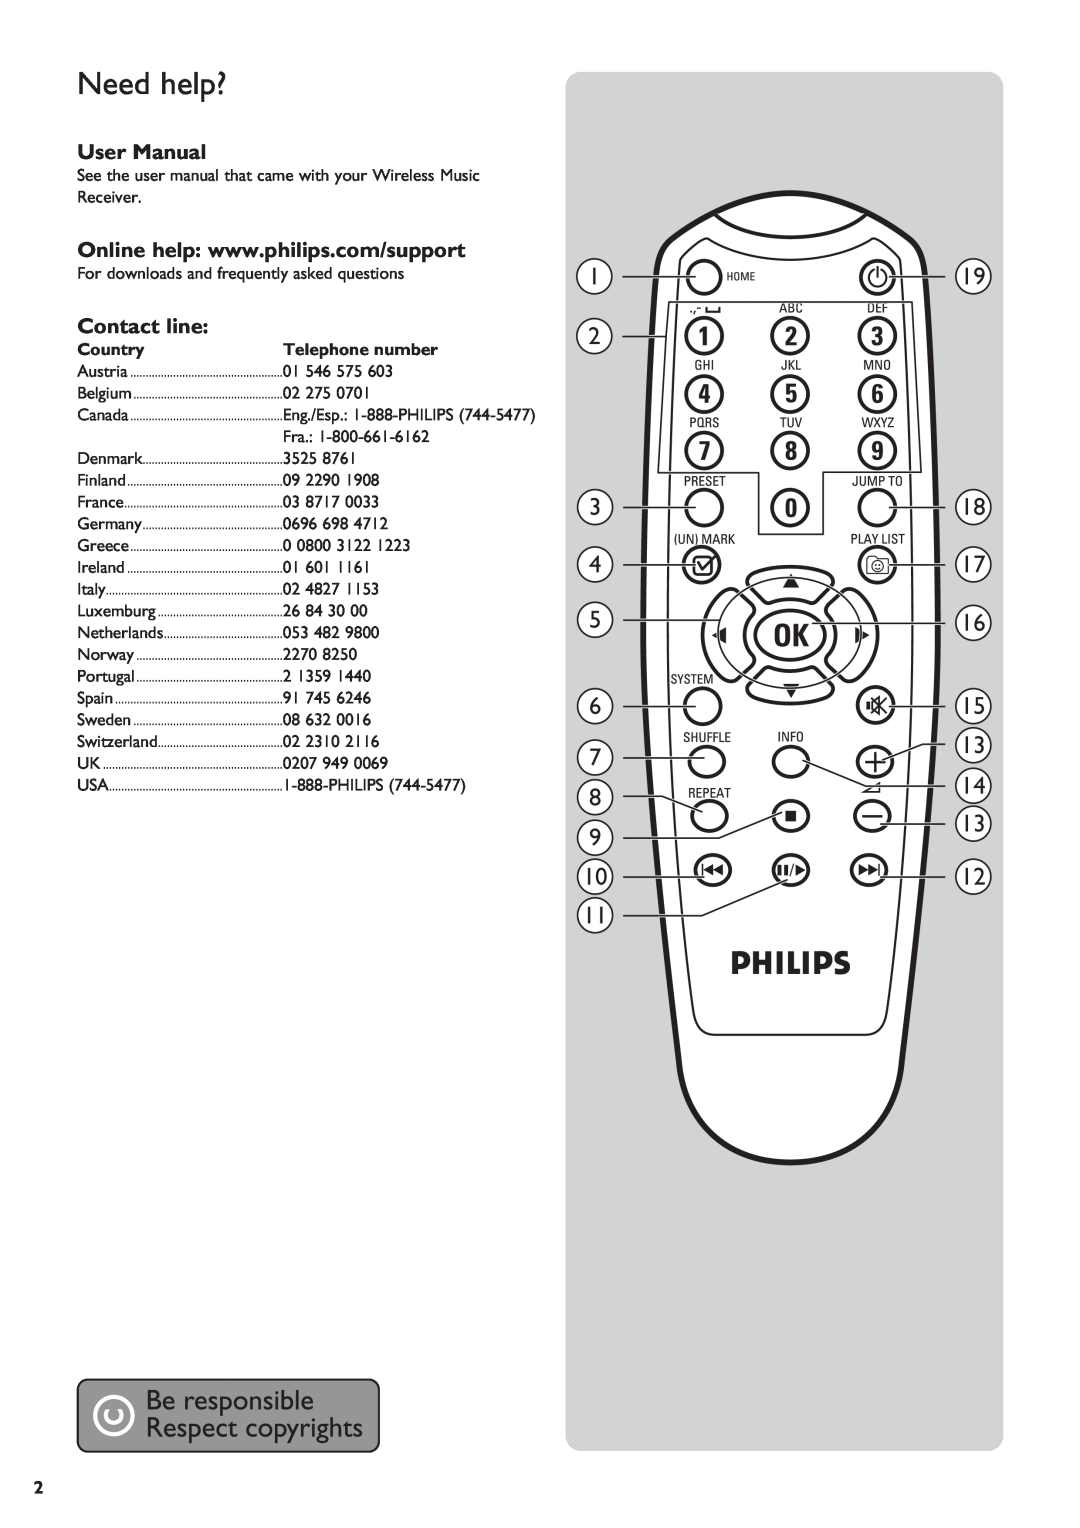 Philips SLA5500 user manual Need help?, 1 2 3, 19 18 17 16 15, Contact line, Country, Telephone number 